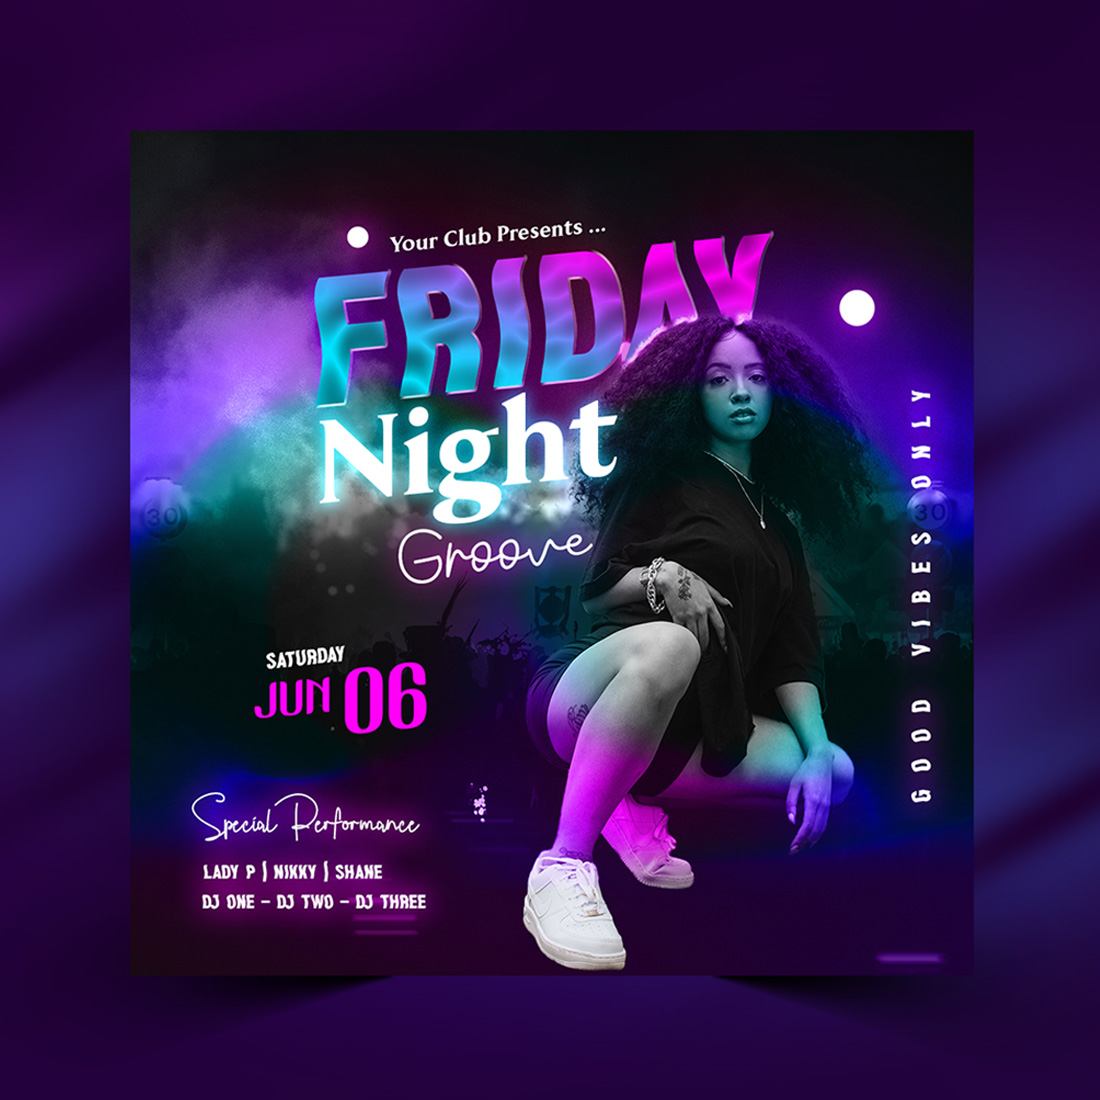 Night Party Flyer - Event Flyer PSD Template cover image.